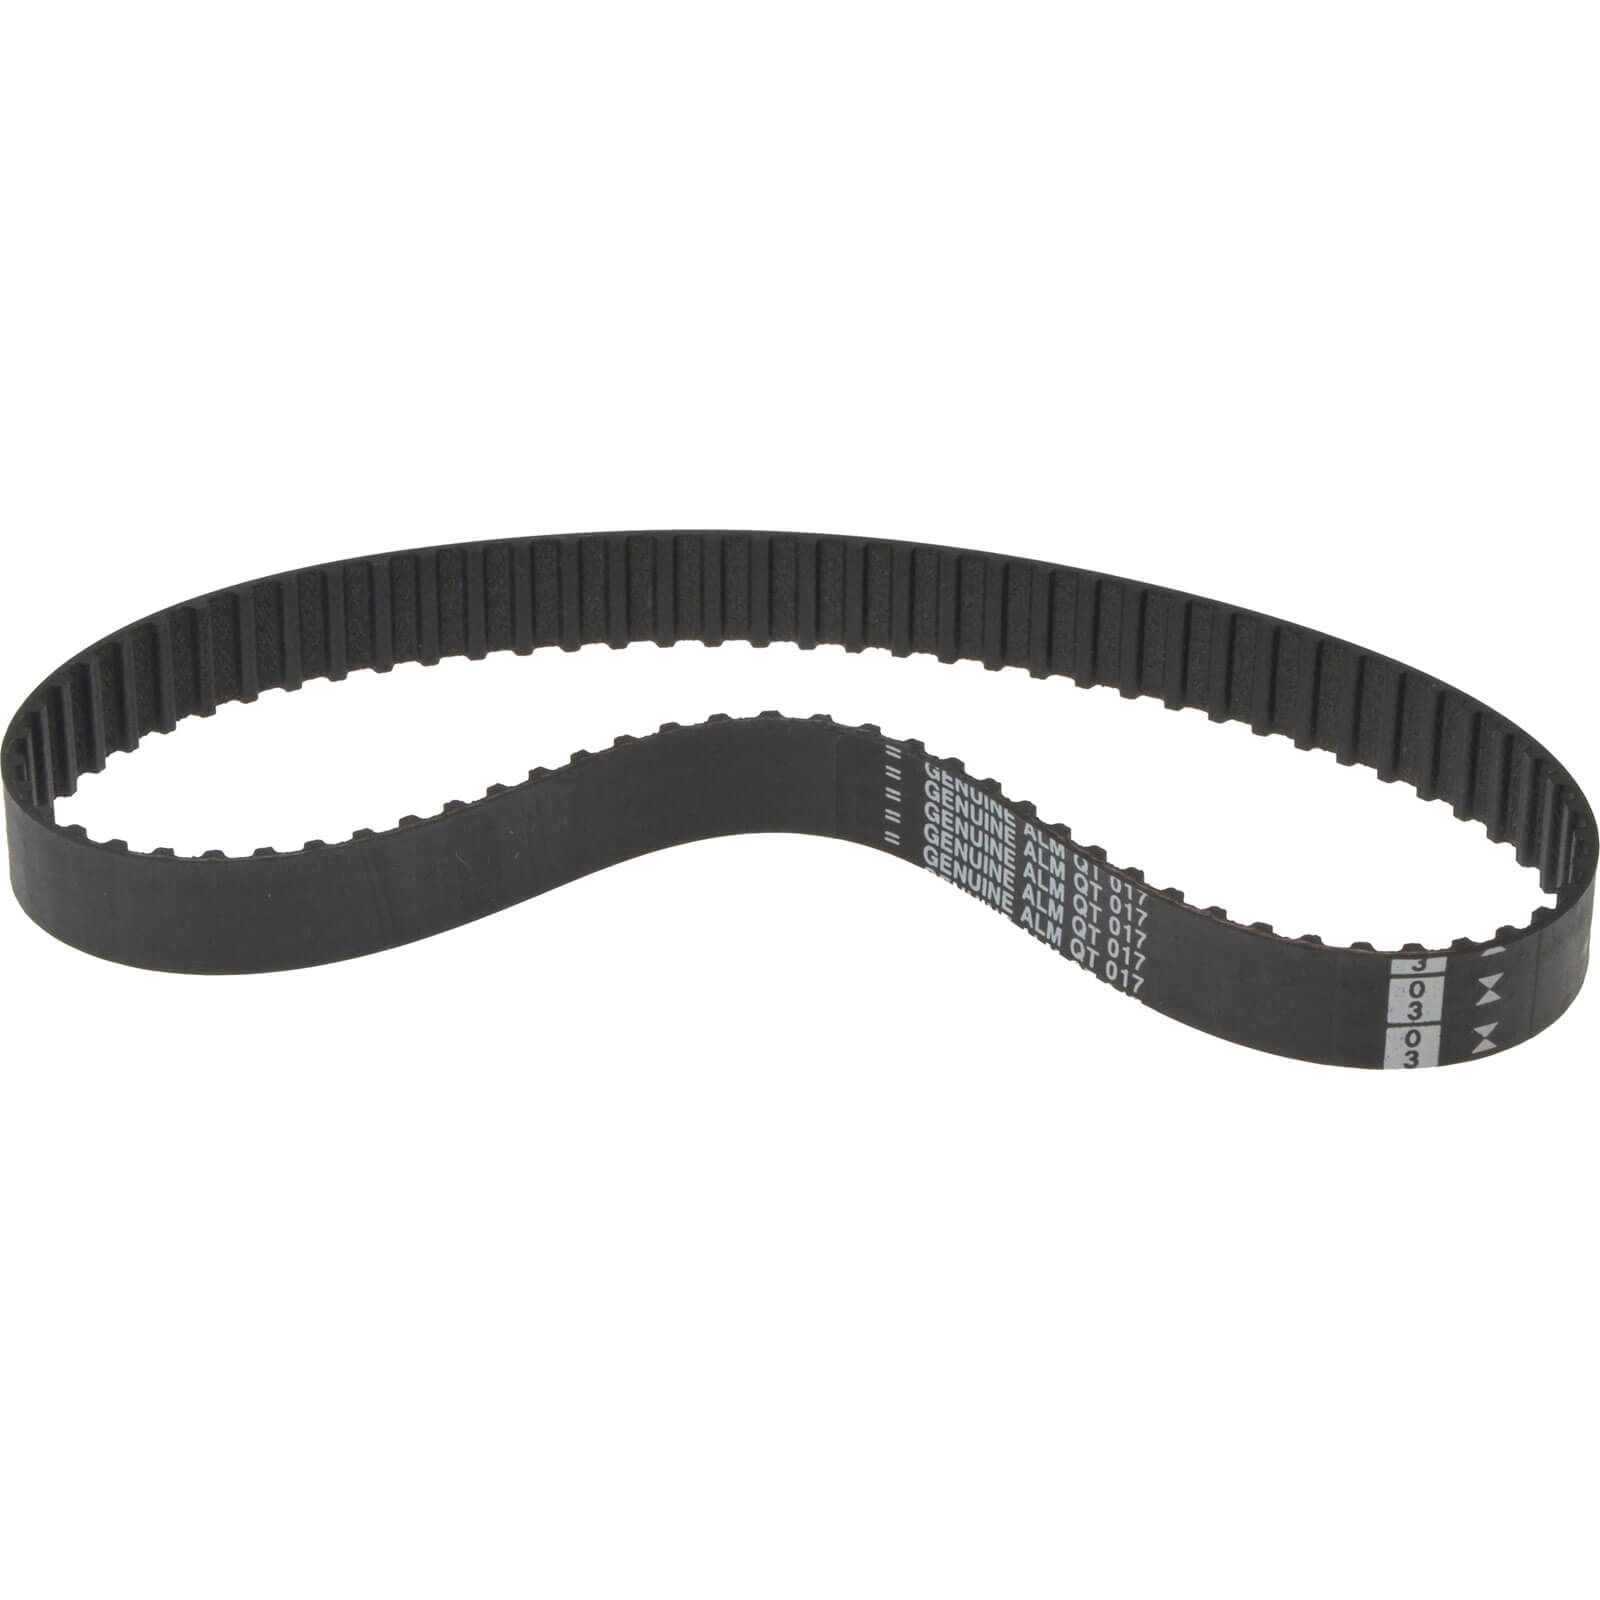 Image of ALM QT017 Drive Belt for Qualcast Rear Grass Boxed Lawnmowers